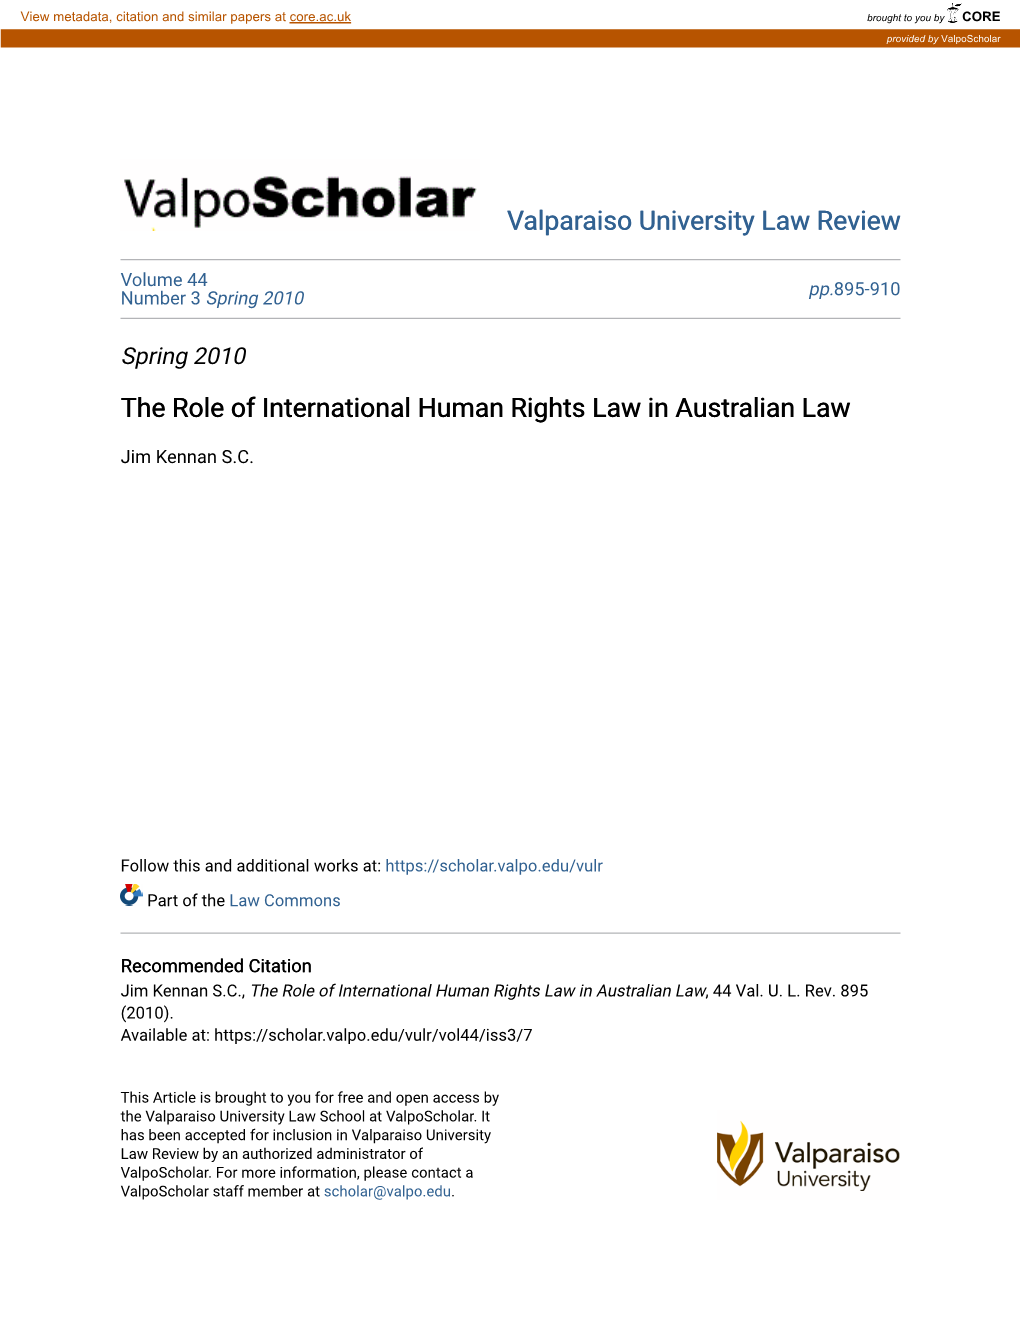 The Role of International Human Rights Law in Australian Law